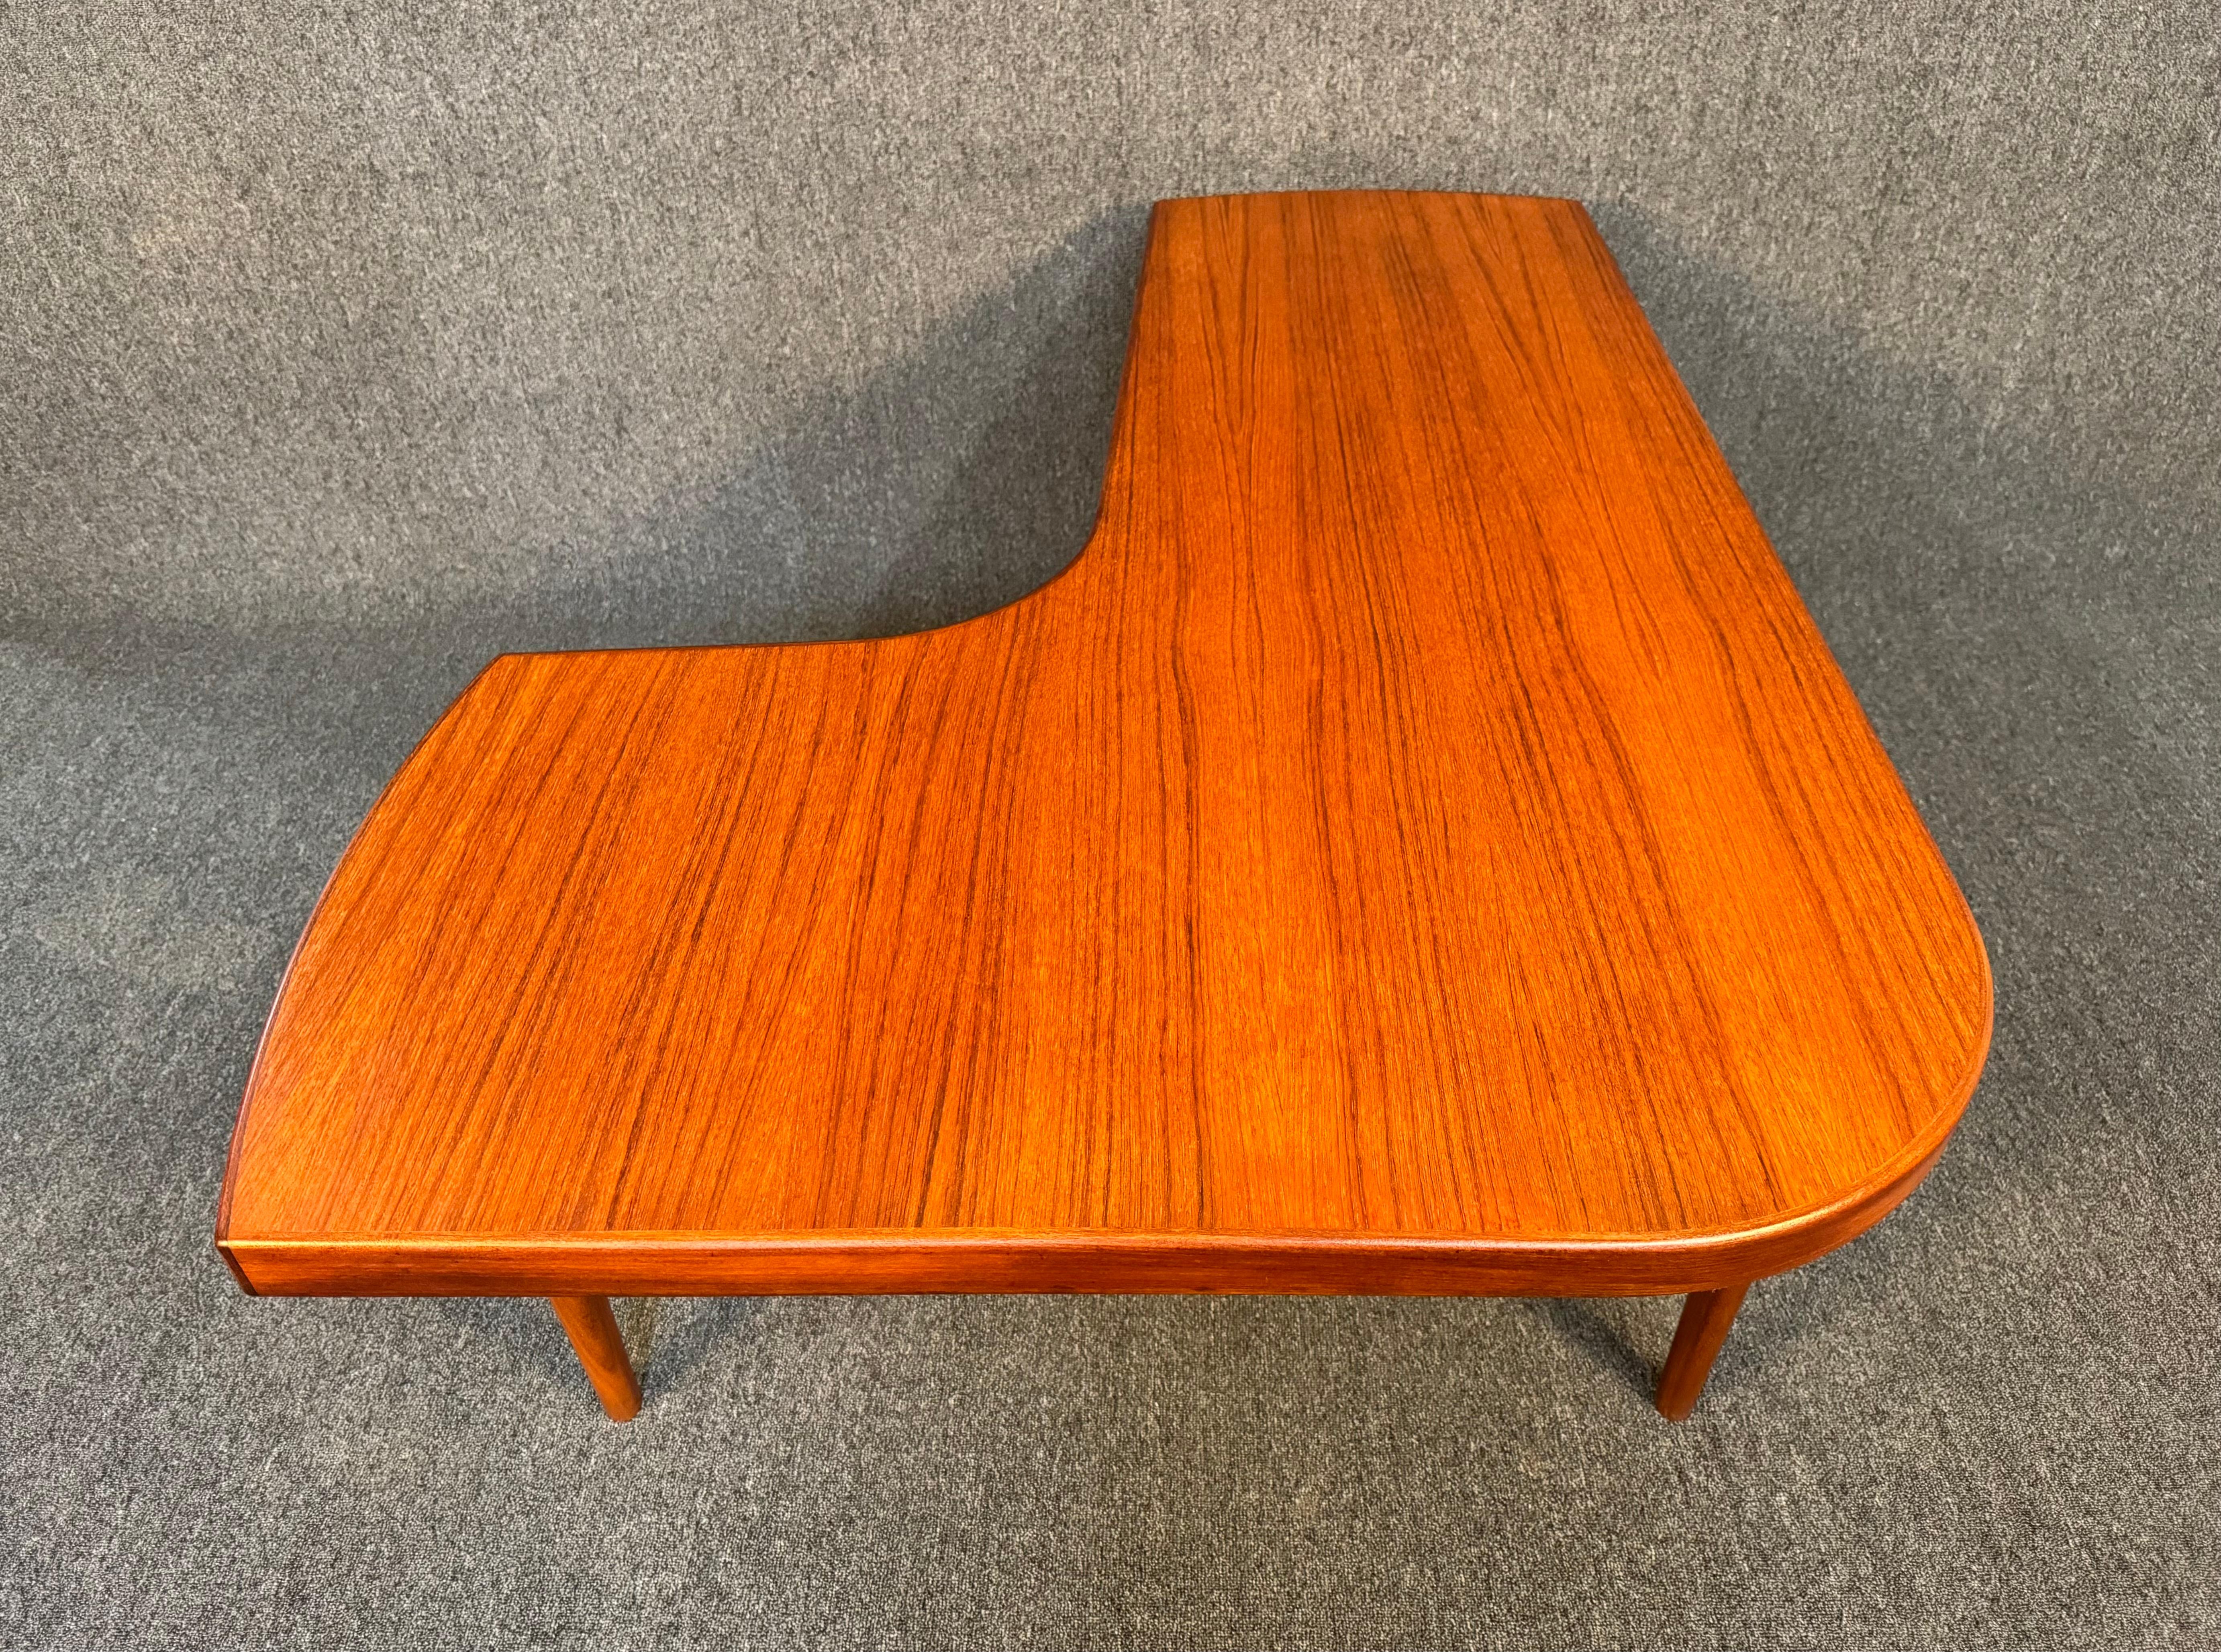 Here is a beautiful Scandinavian modern coffee table in teak wood manufactured in Denmark in the 1960's.
This lovely table, recently imported from Europe to California before its refinishing, features a vibrant wood grain, a boomerang - L shaped top